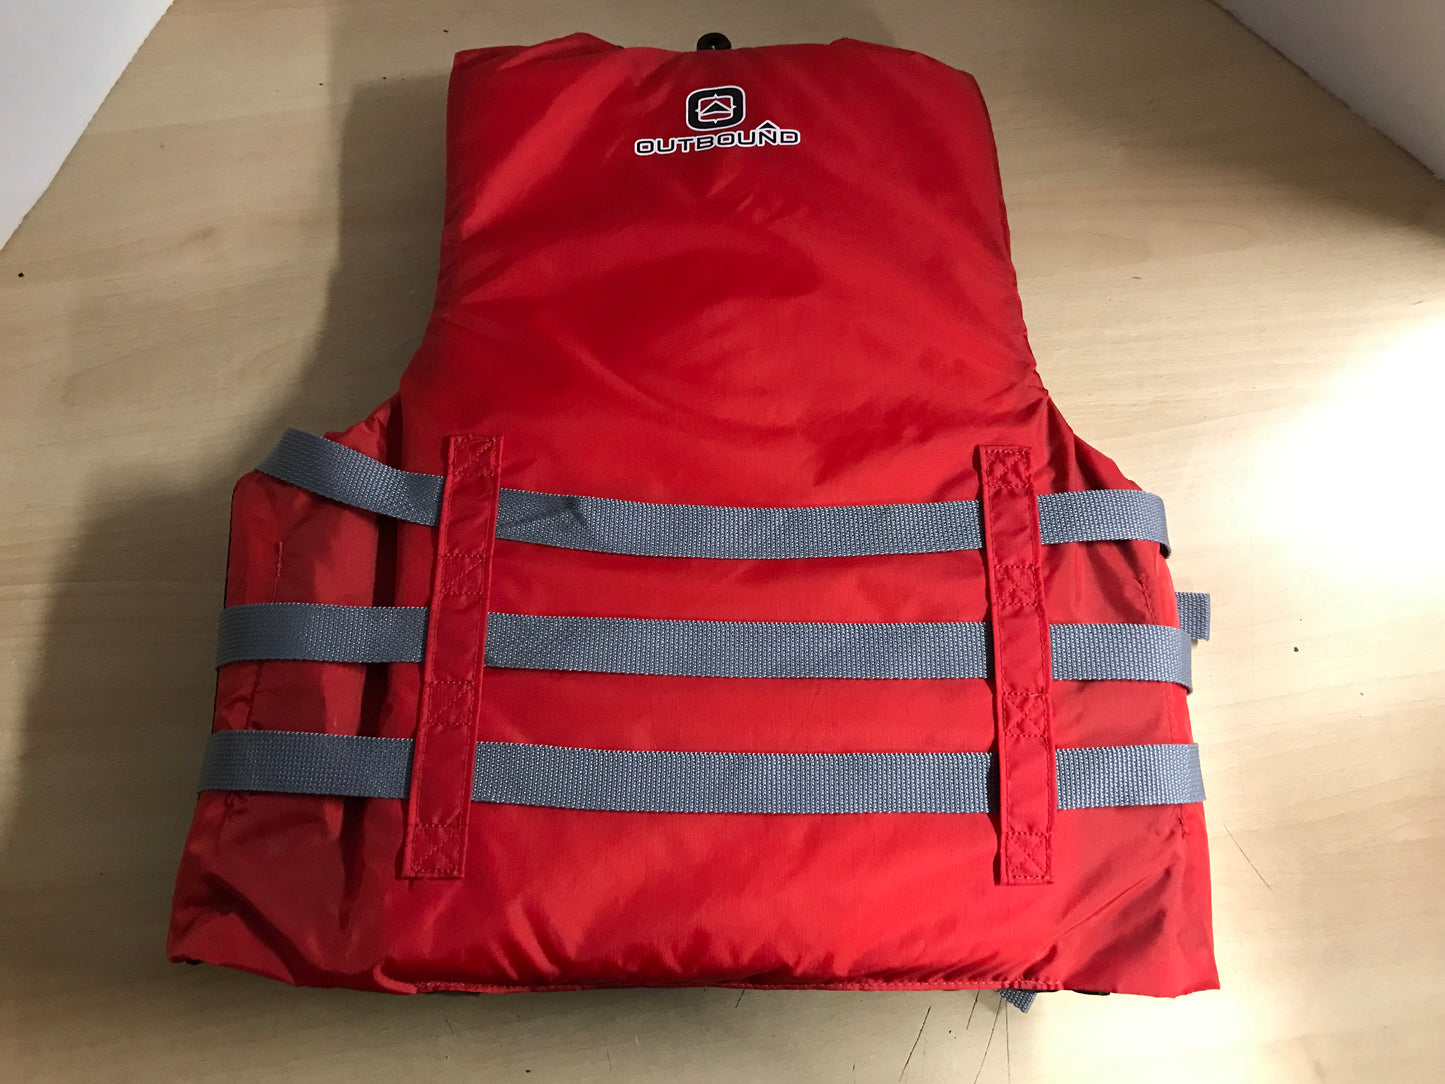 Life Jacket Adult Size Small - Medium Outbound Red Black New Demo Model